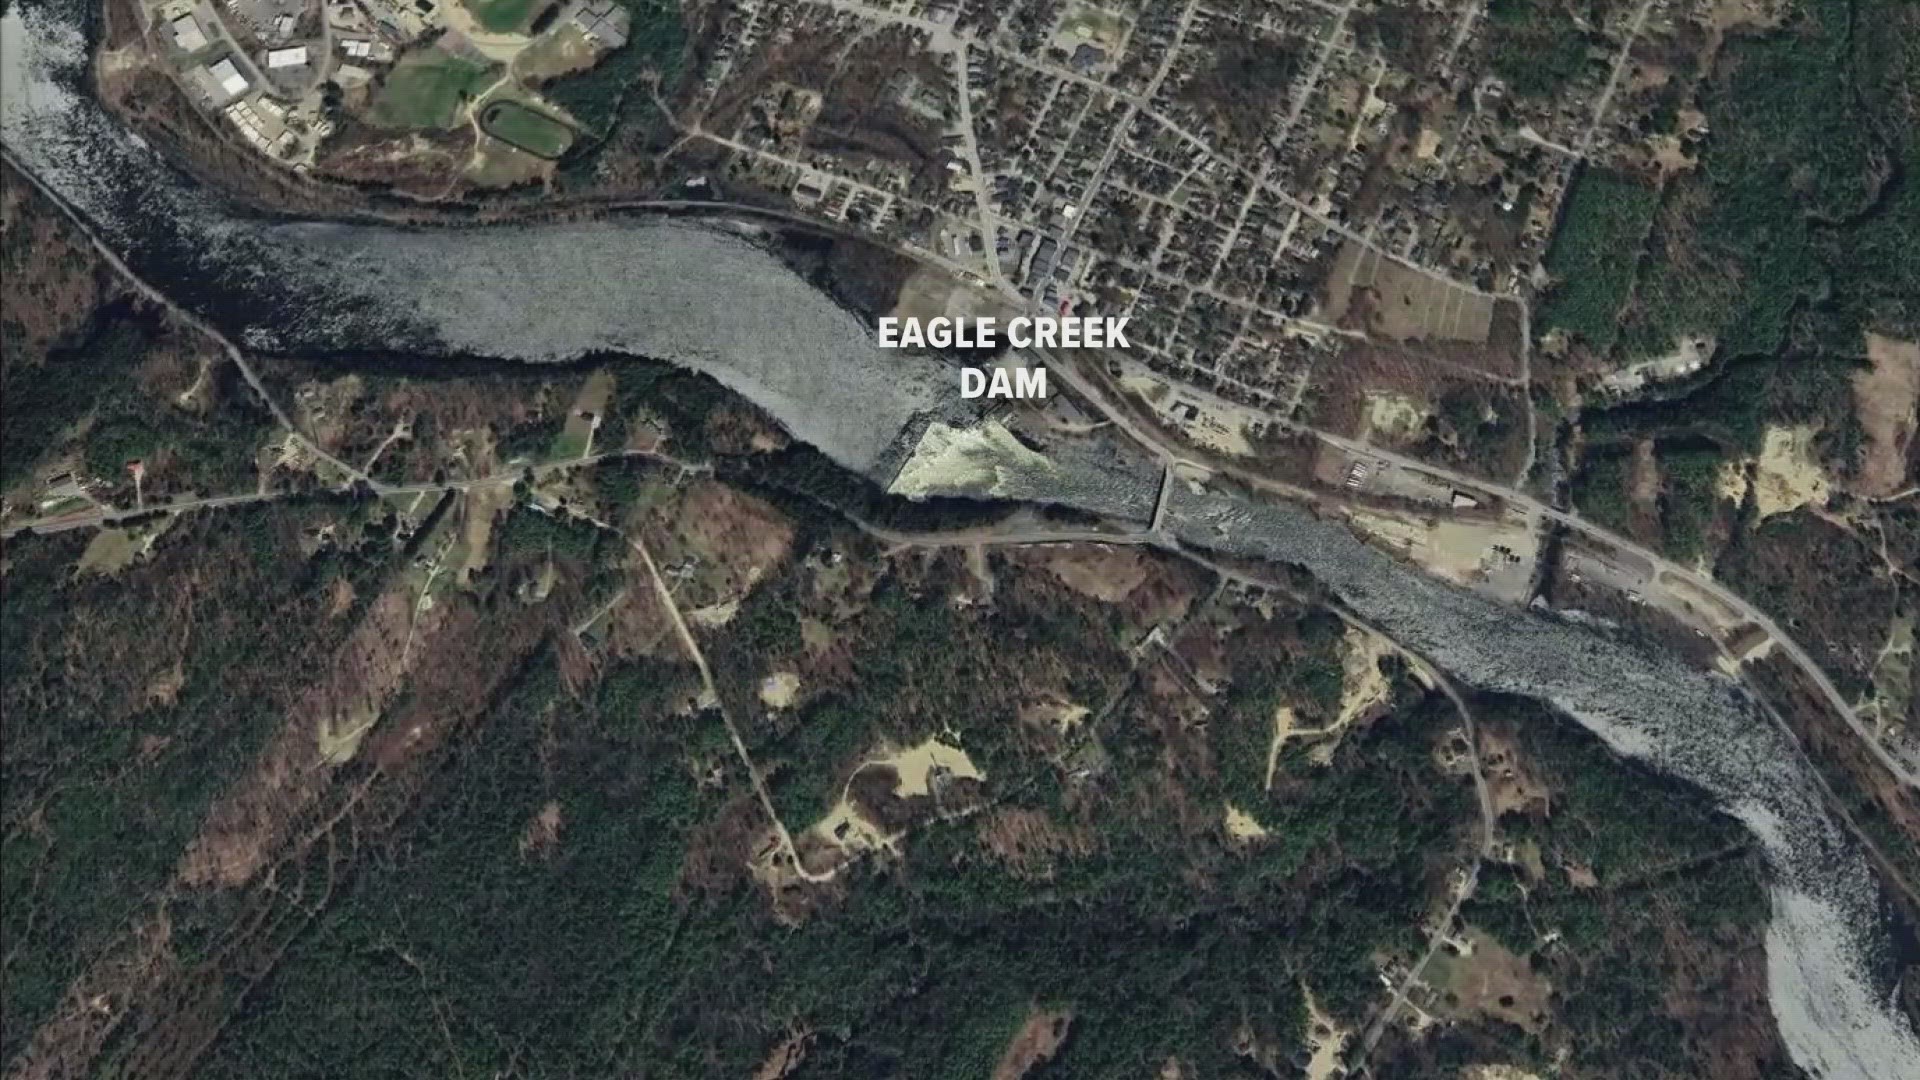 Lisbon police said the man was found dead by the Eagle Creek Renewable Energy Dam.